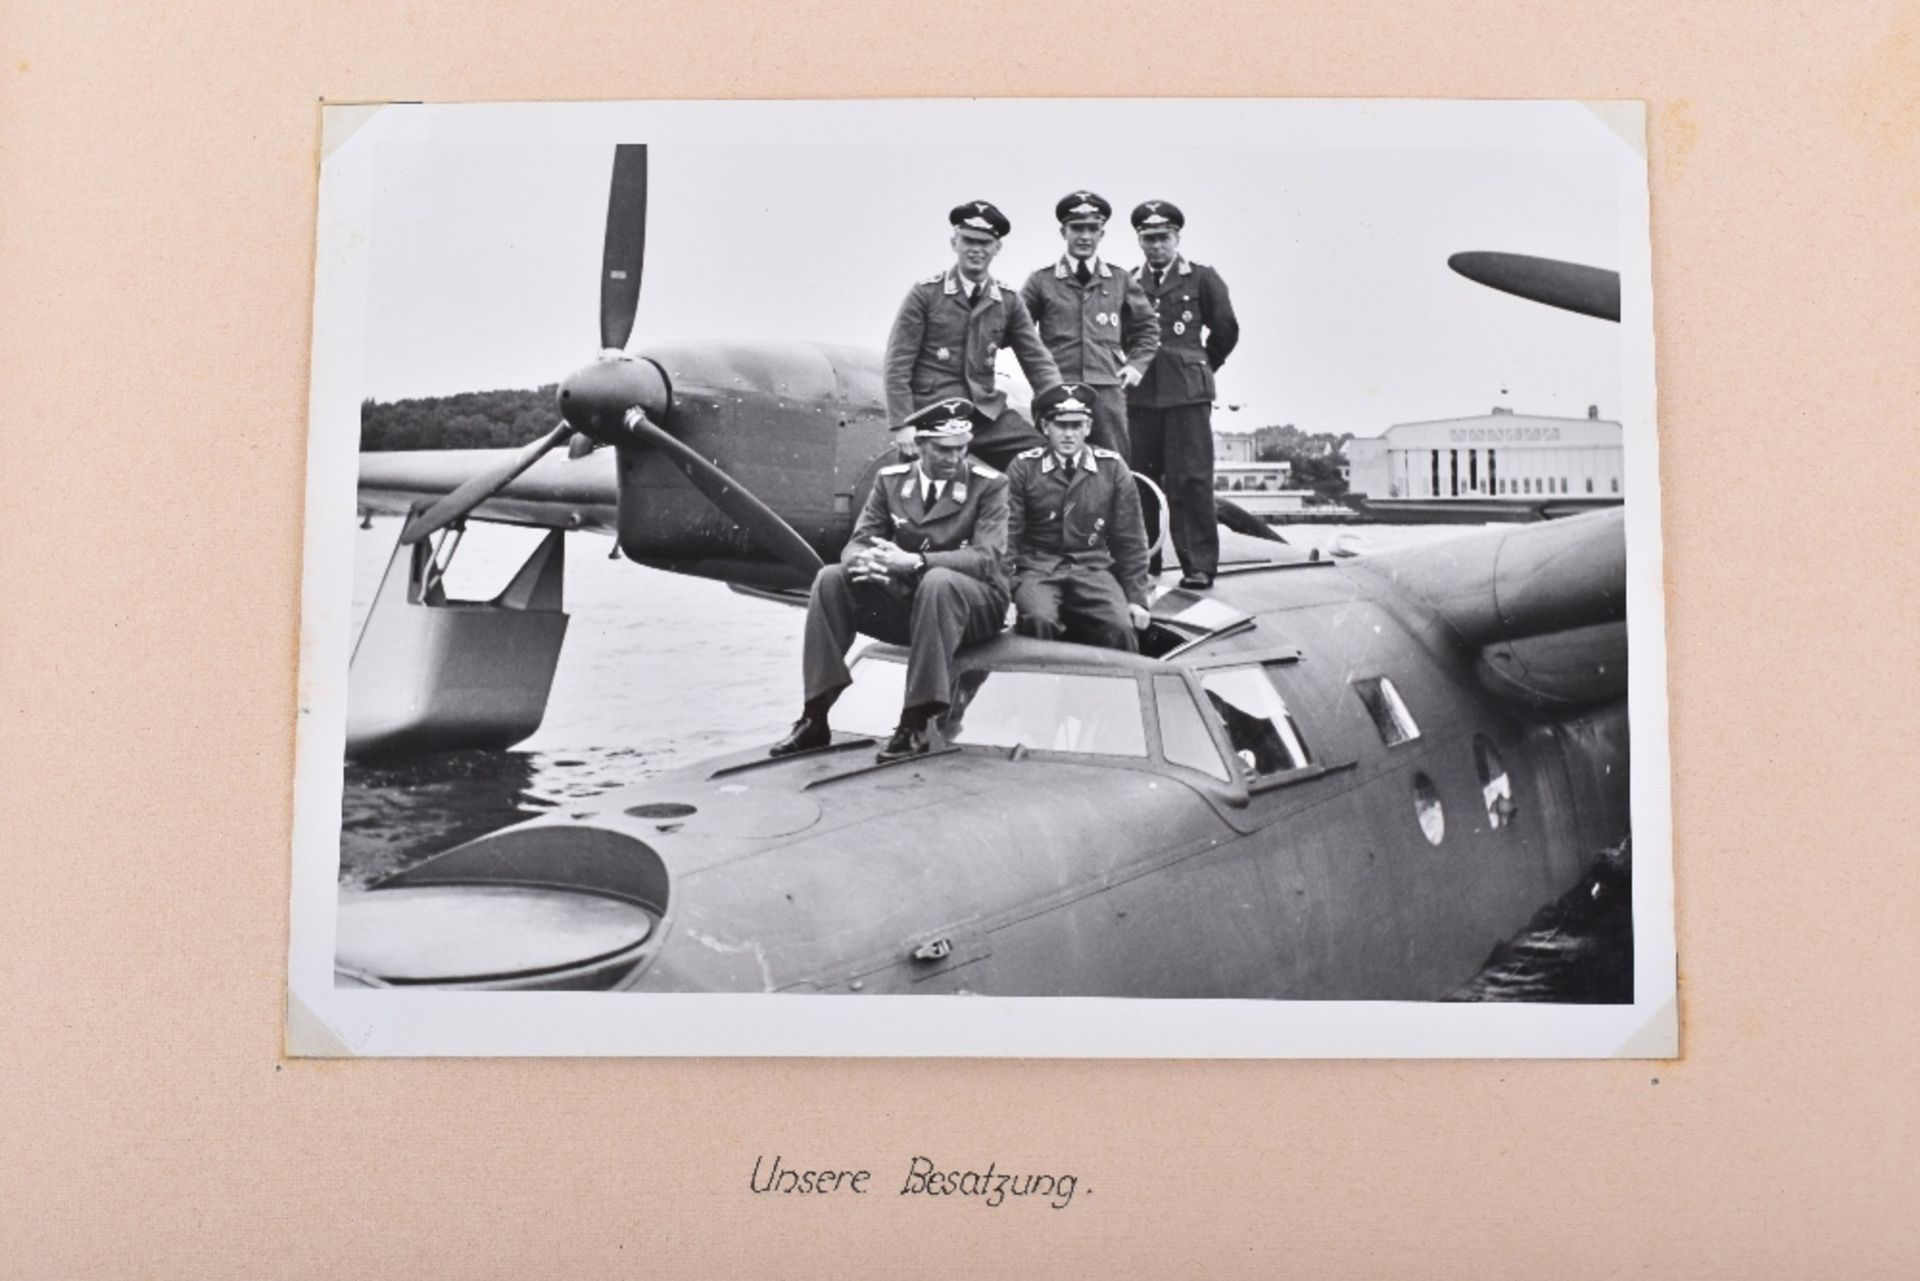 Outstanding and Historically Interesting Luftwaffe Photograph Album, Log Book and Soldbuch of Observ - Image 41 of 96